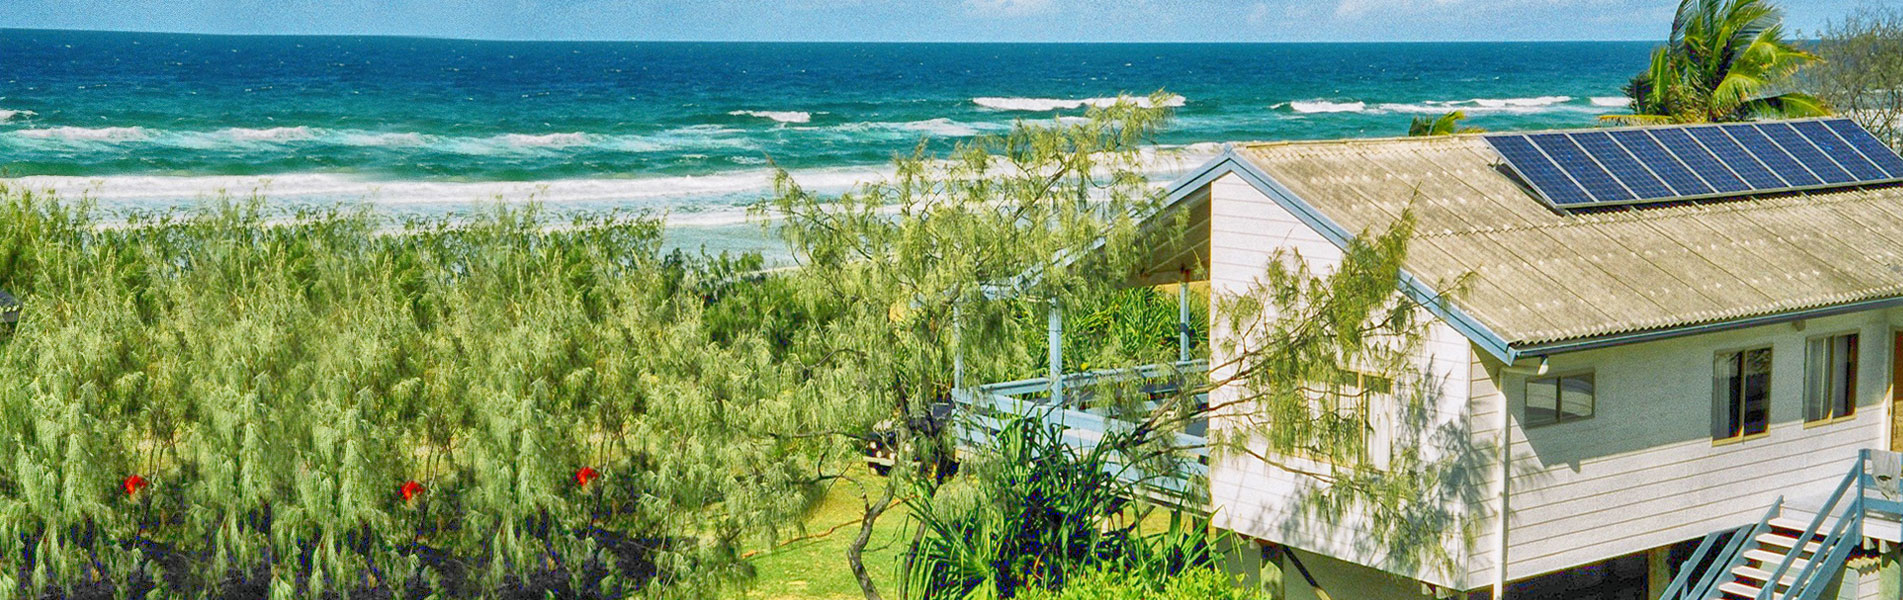 Fraser Island Beach Front Holiday House & Cottage